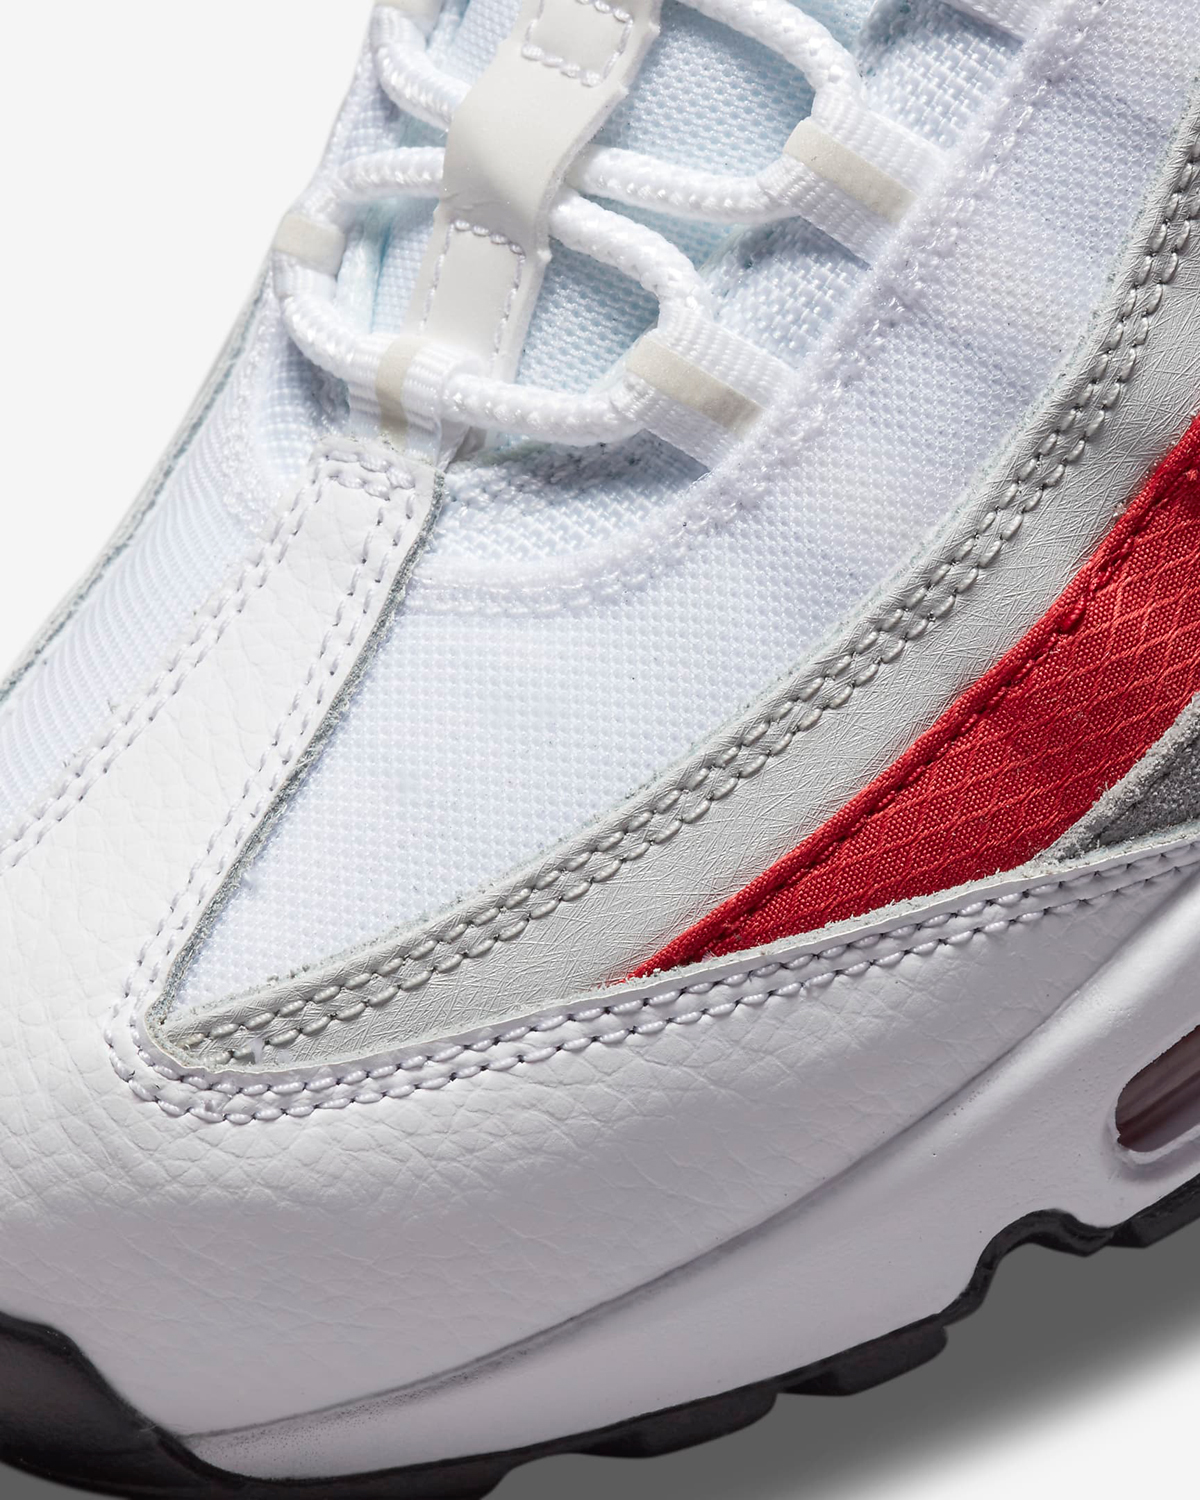 nike-air-max-95-prototype-white-black-particle-grey-varsity-red-release-date-7